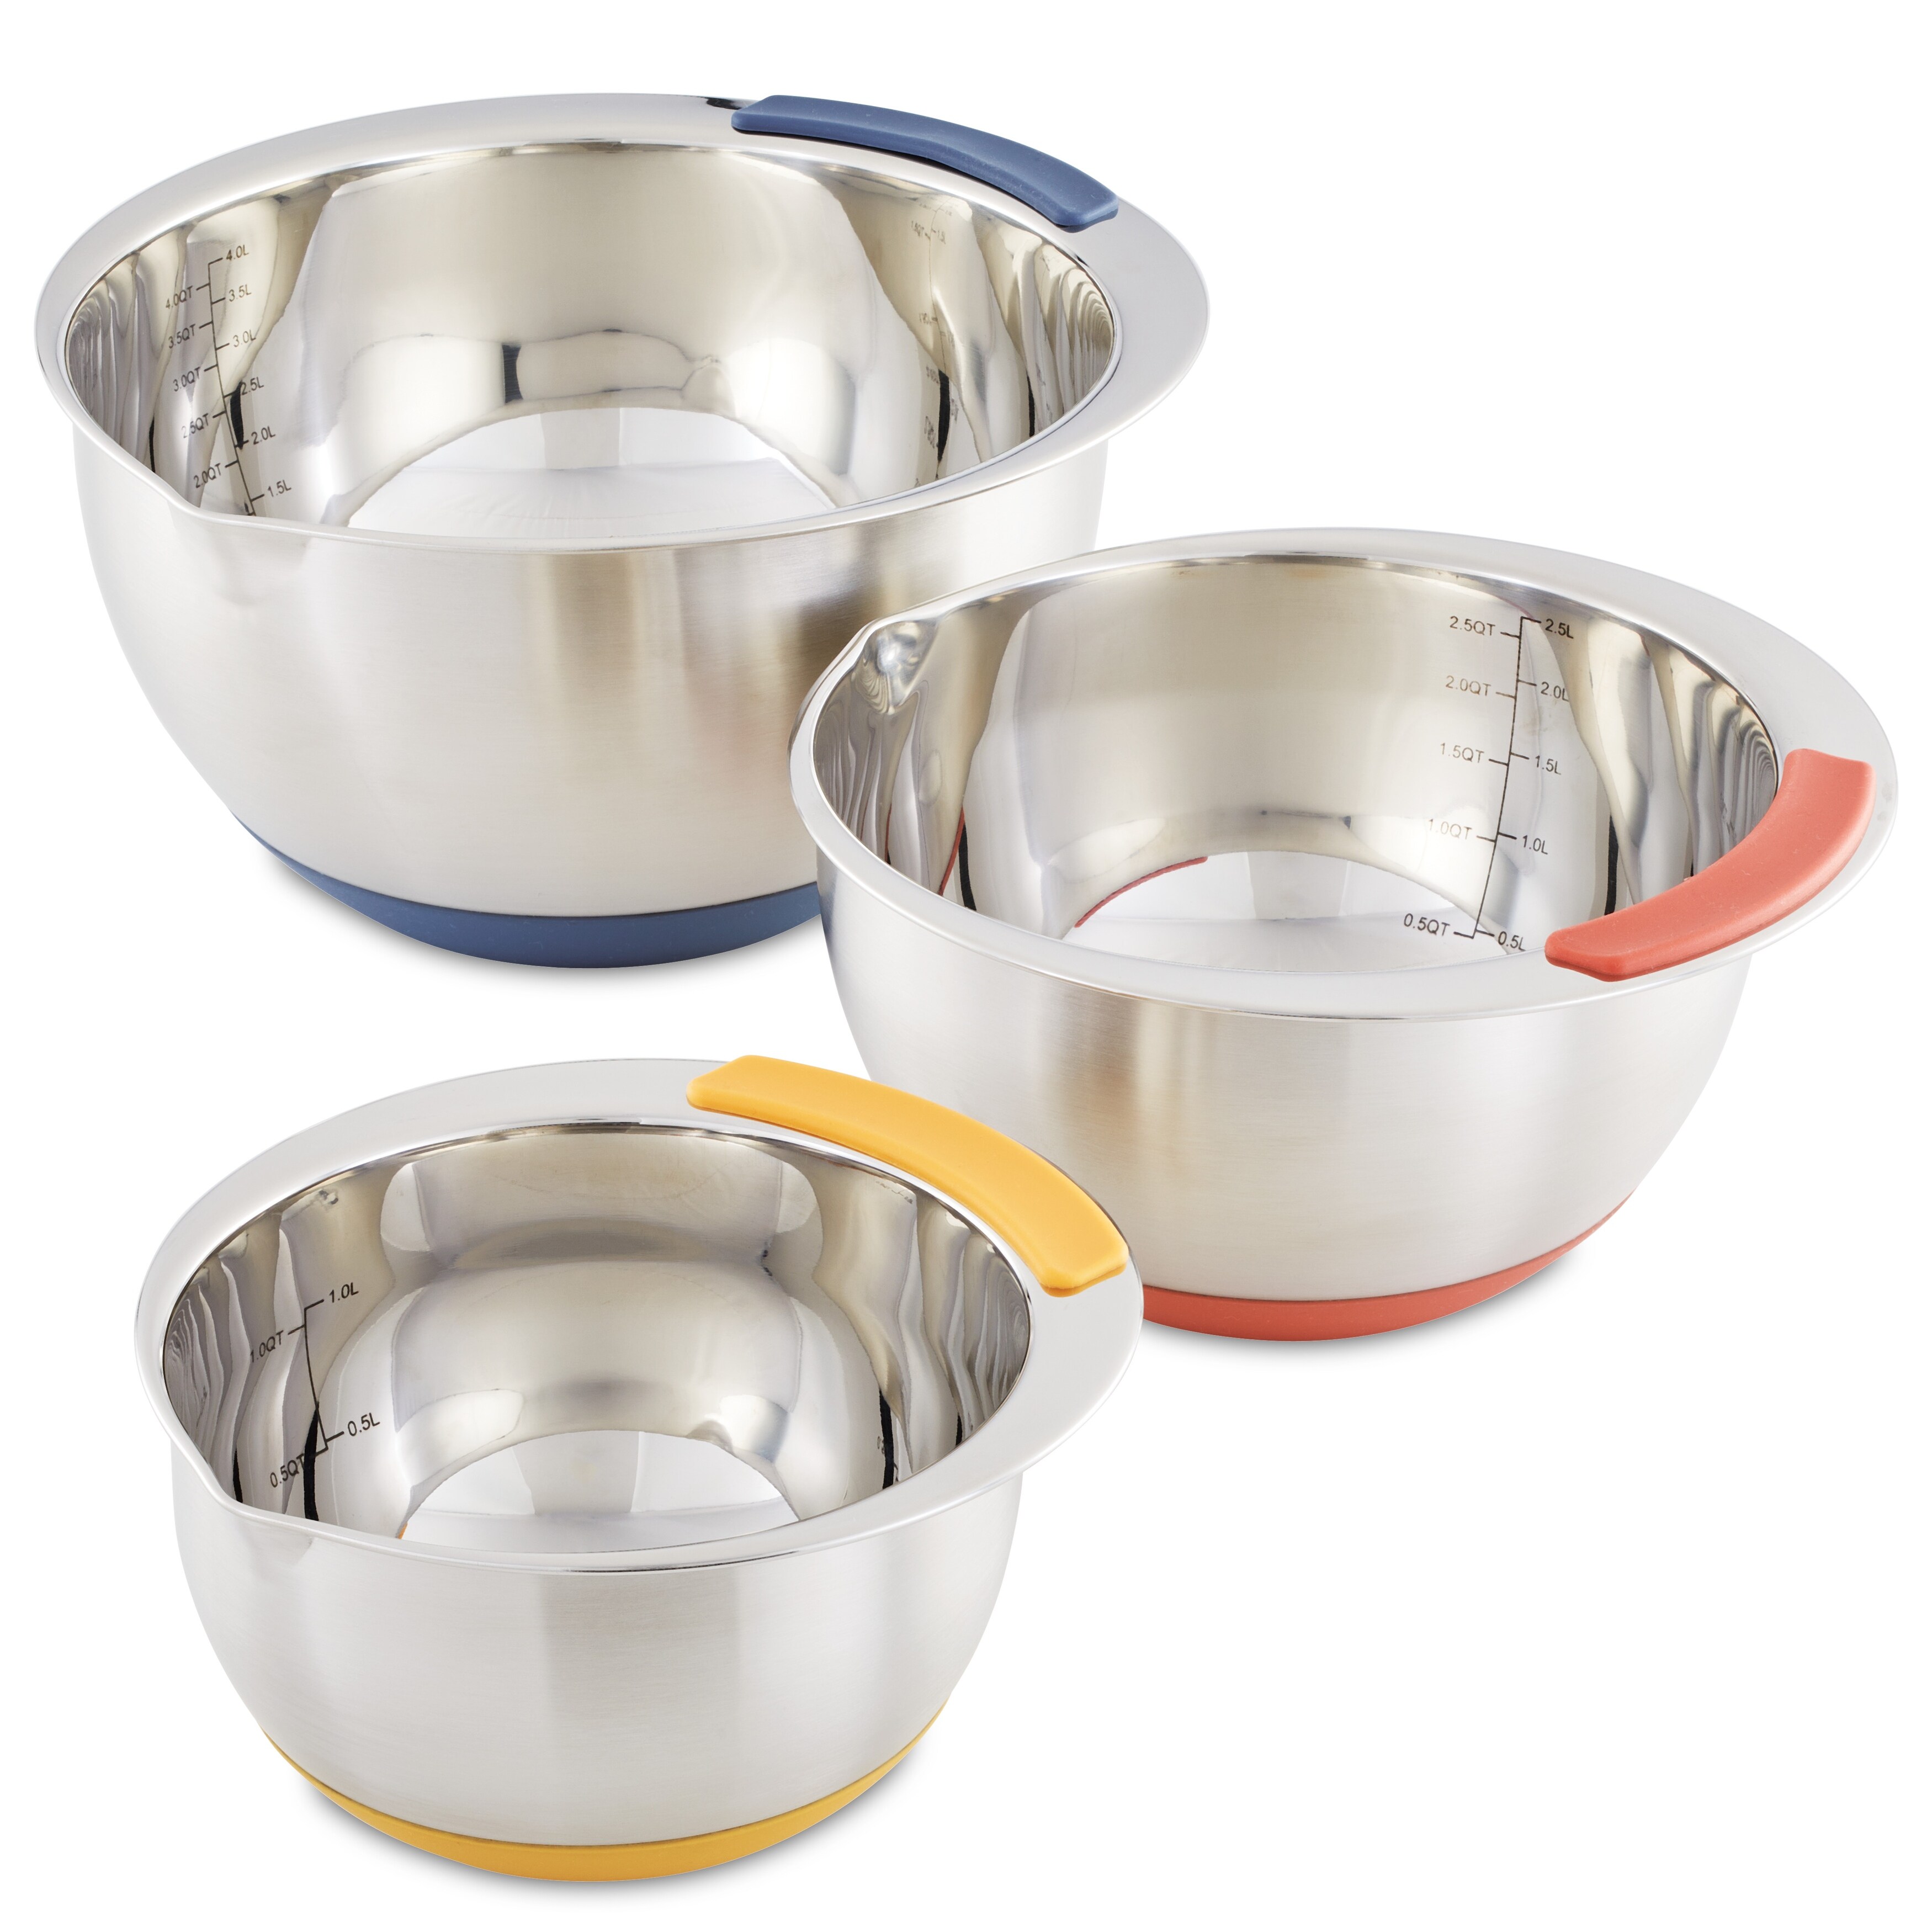 https://ak1.ostkcdn.com/images/products/is/images/direct/d52adccf2b5b9fd507ab38da593c98d884588d69/Ayesha-Curry-Pantryware-Stainless-Steel-Nesting-Mixing-Bowls-Set%2C-3-Piece%2C-Silver-with-Color-Accent-Handles.jpg